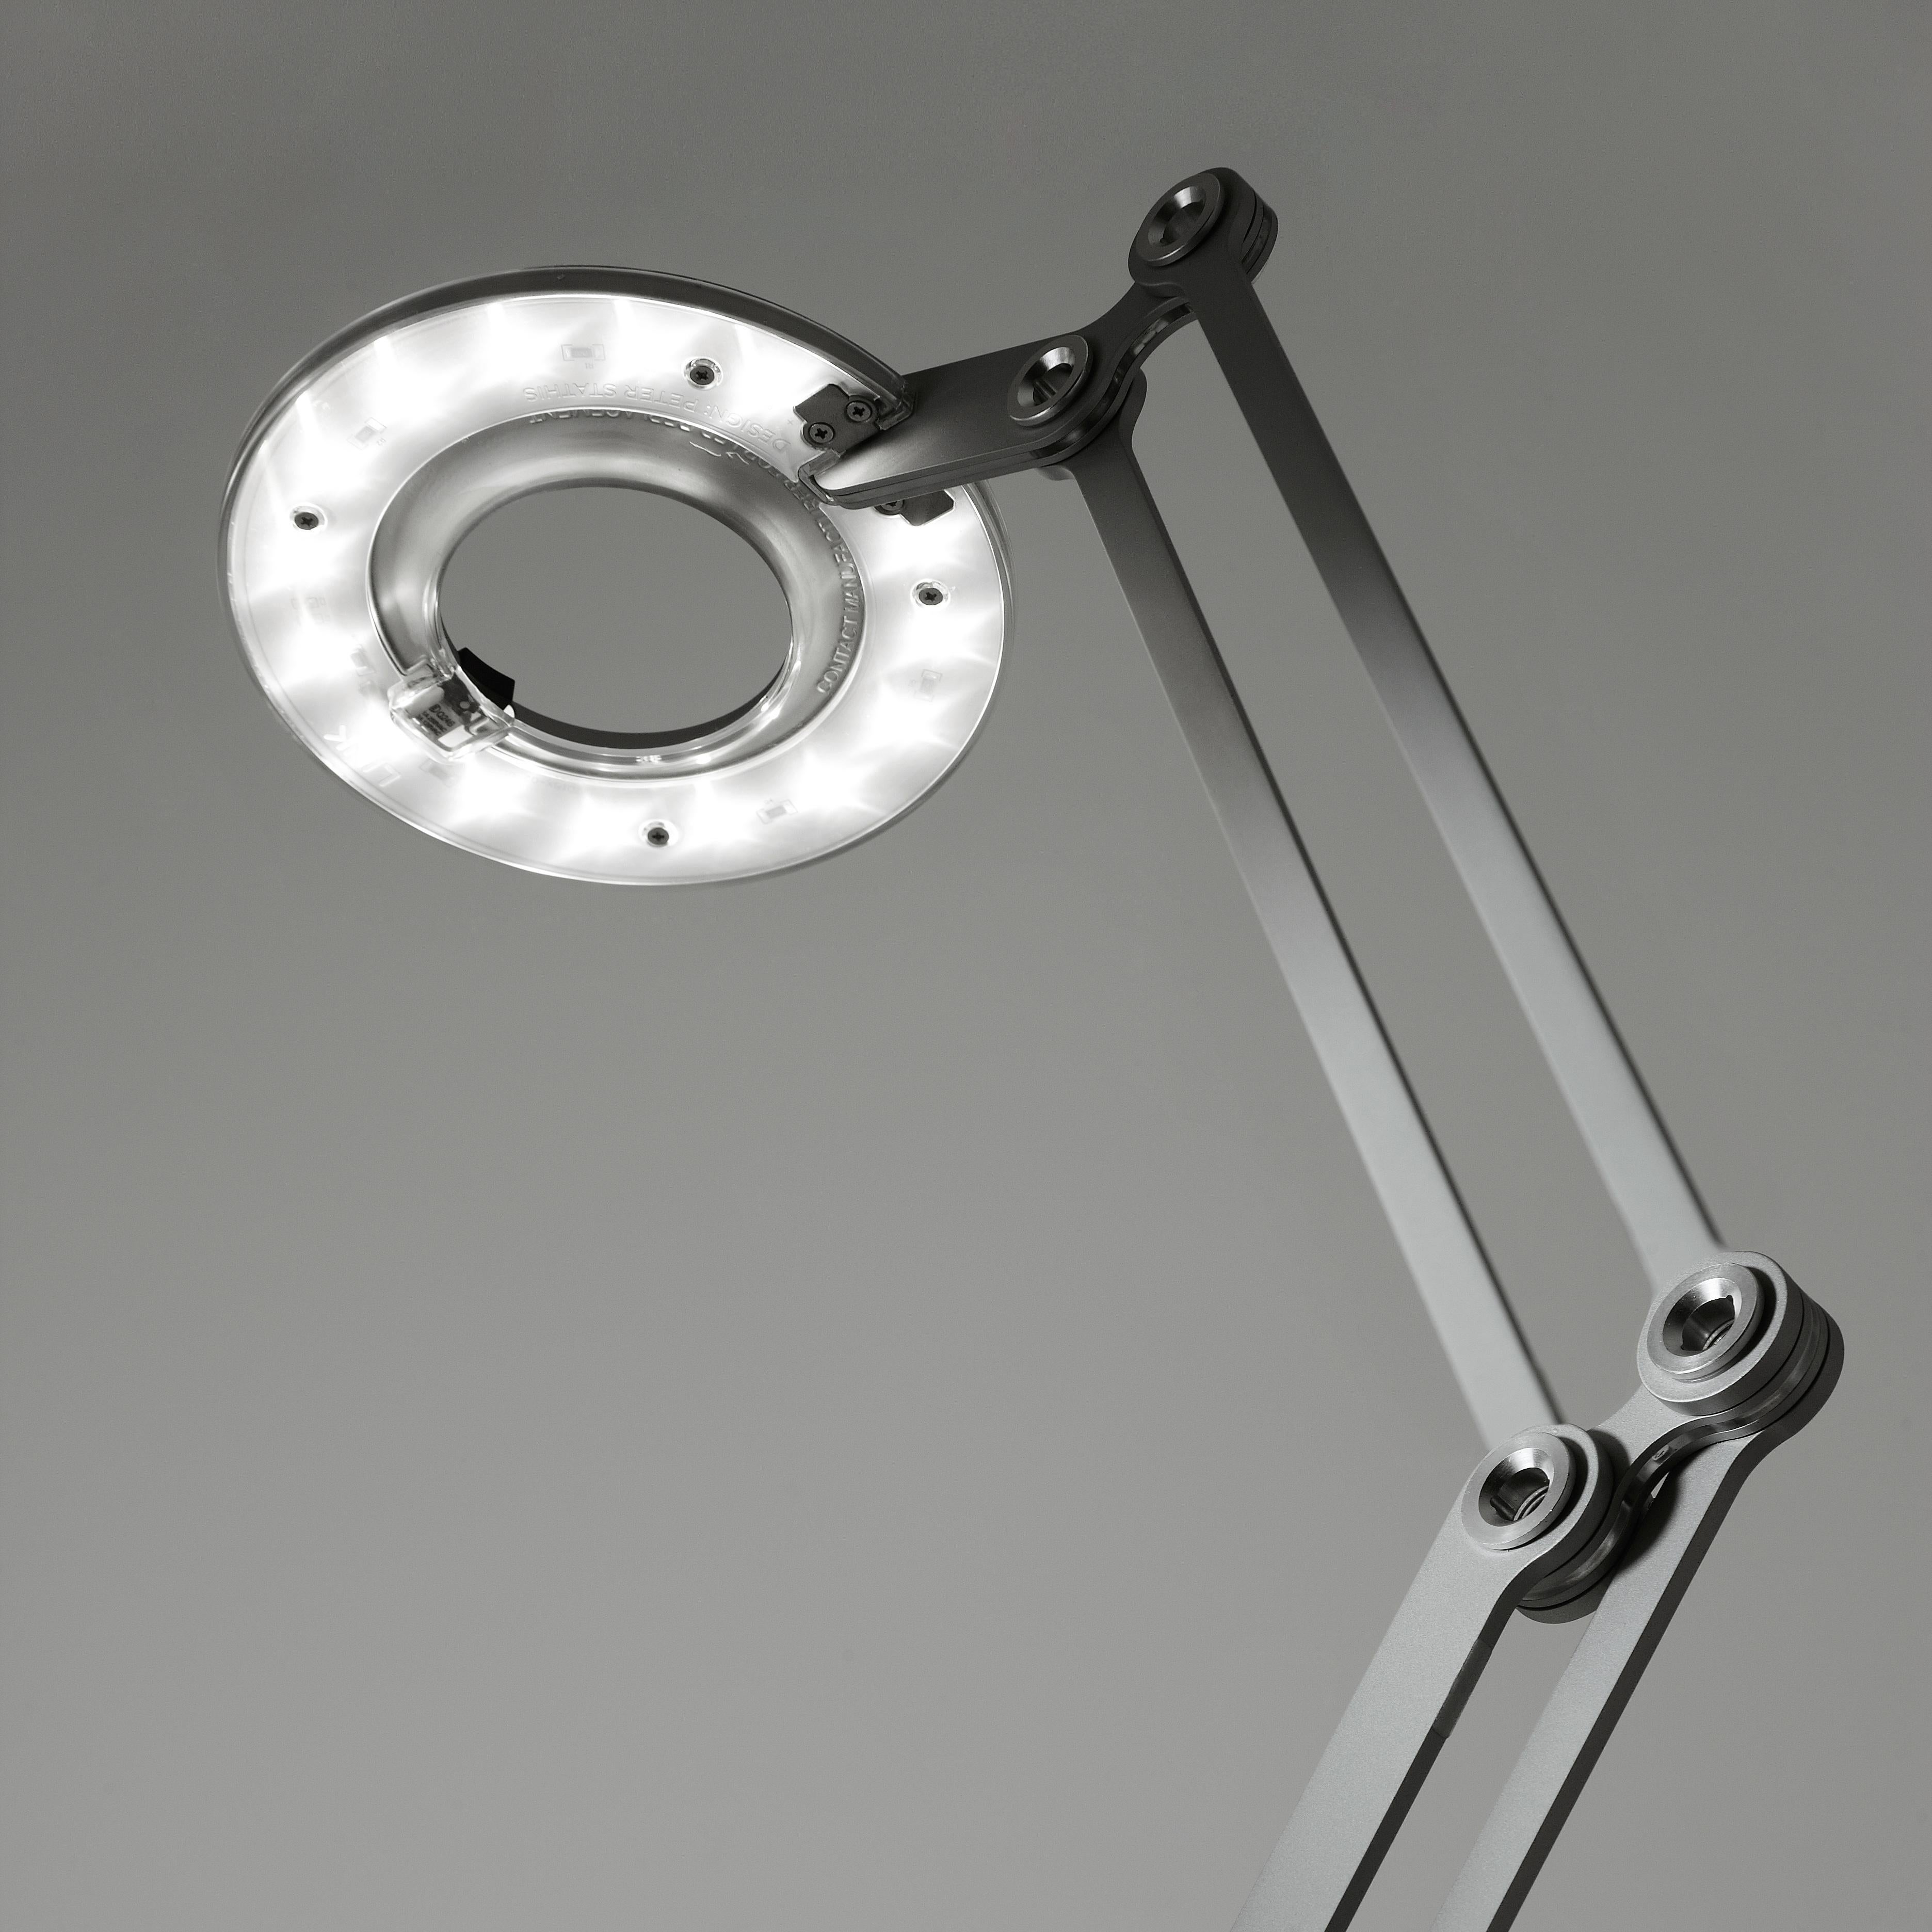 Link modernizes the classic pantograph task lamp, incorporating the most advanced LED lighting technology to date. Designed with a dual-purpose shade/handle, Link seamlessly balances performance and style to satisfy focused lighting needs in any